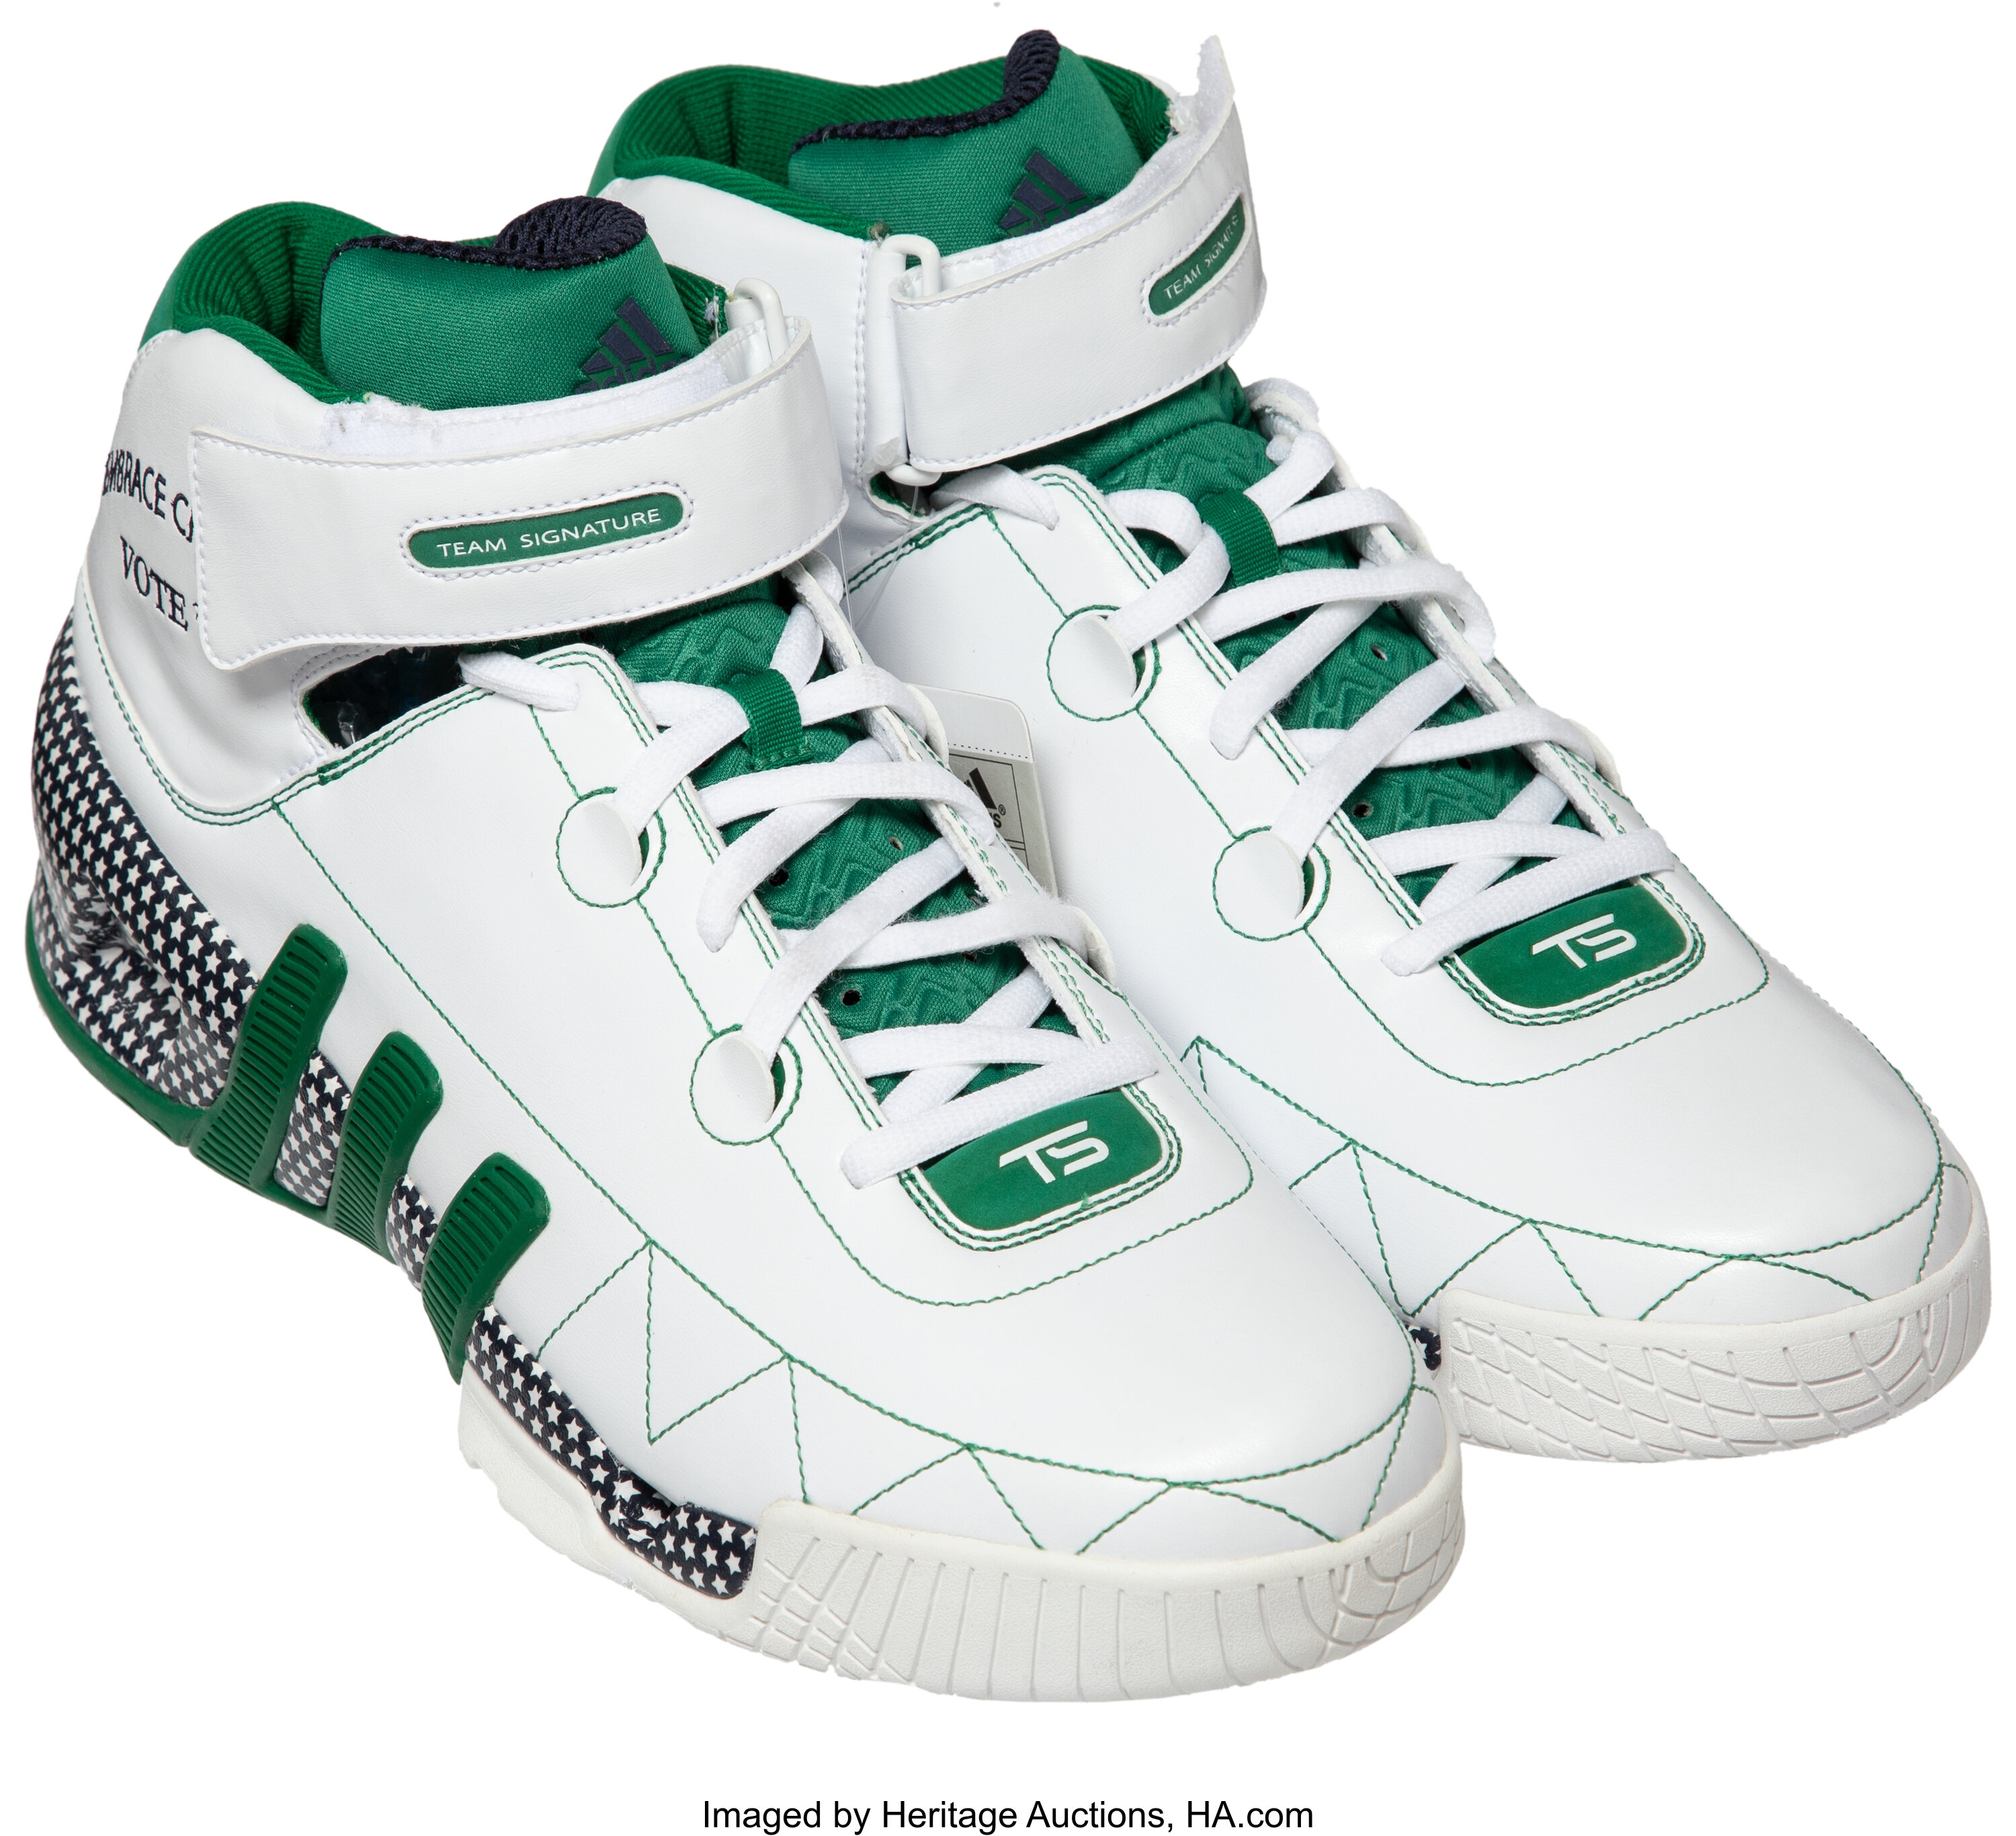 2008 Kevin Garnett Exclusive Sneakers Created for | Lot #53235 | Heritage Auctions